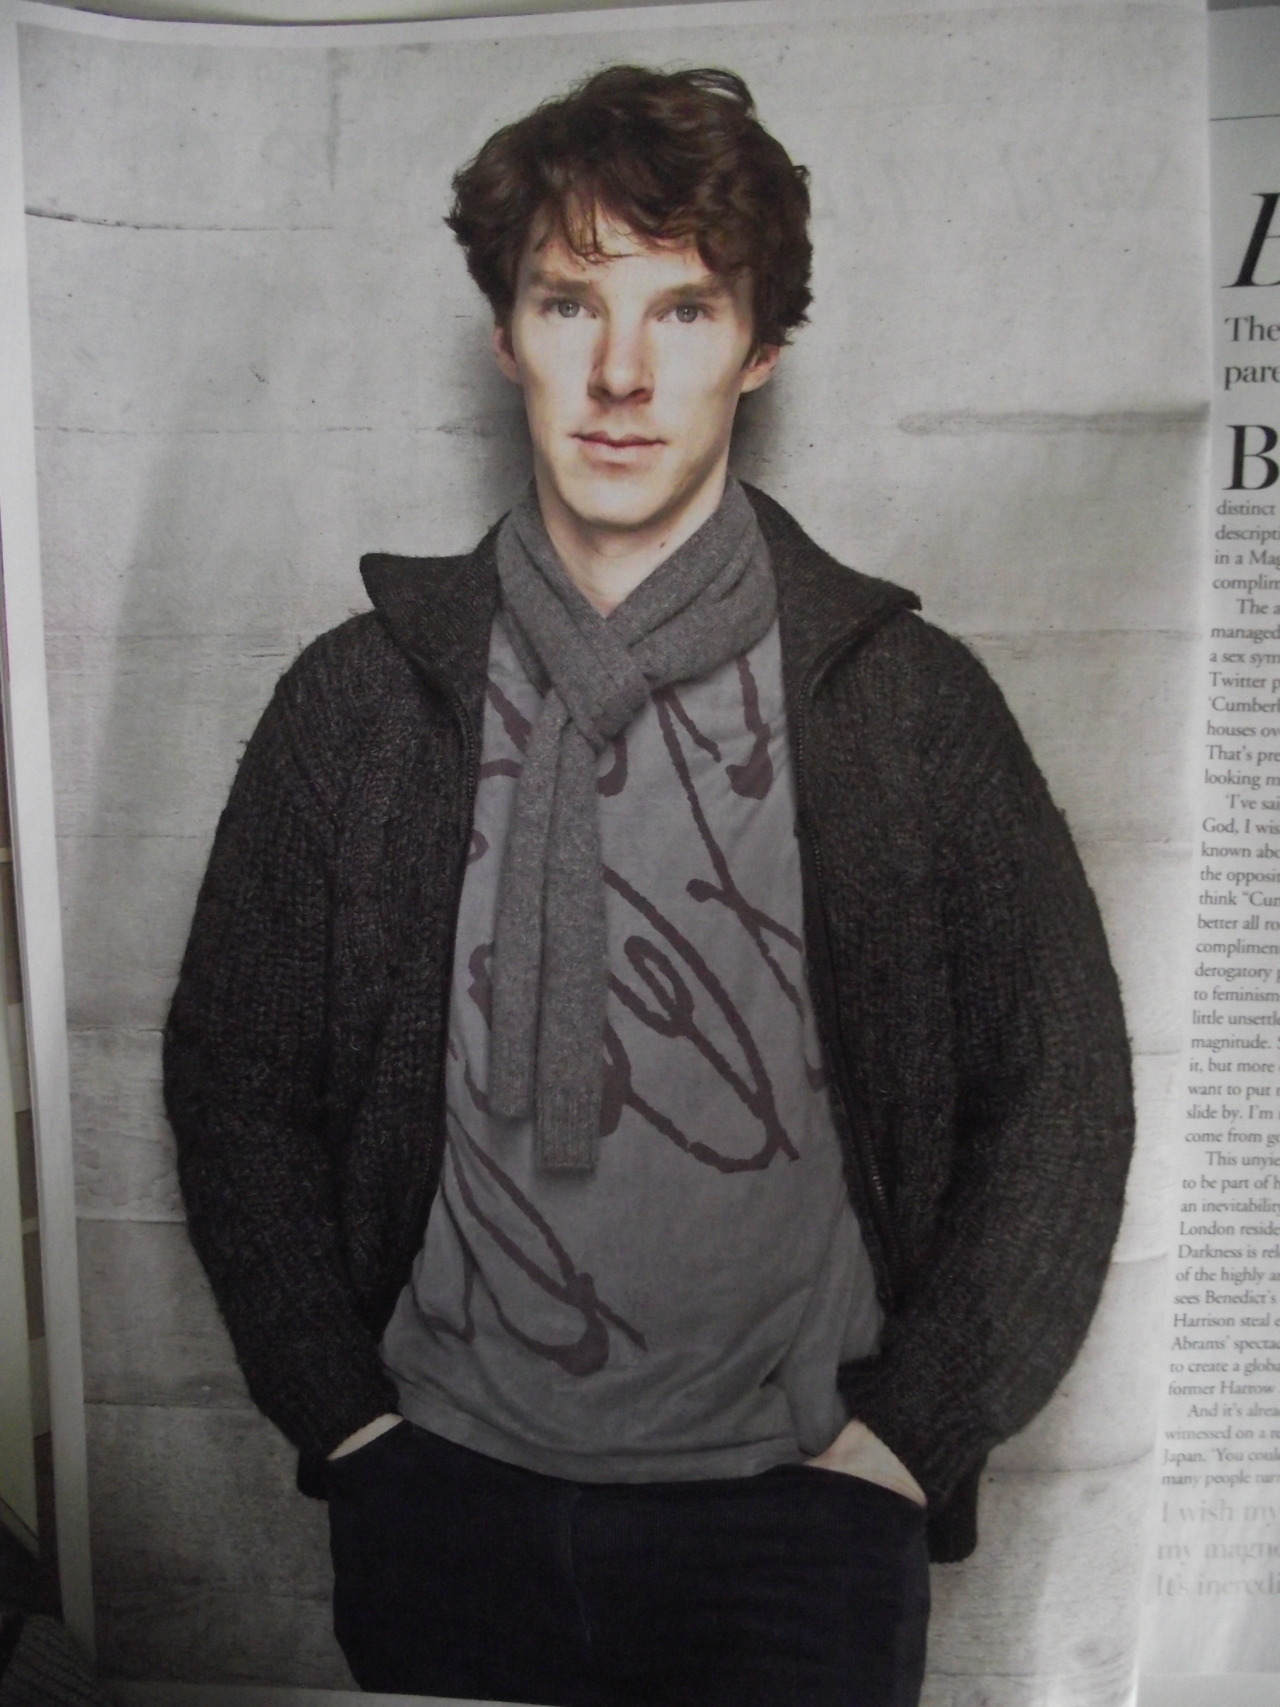 cumberbatchedbabeat221b:

Benedict in Northwest Resident - June 2013

Lovely article by Mark Kebble. 